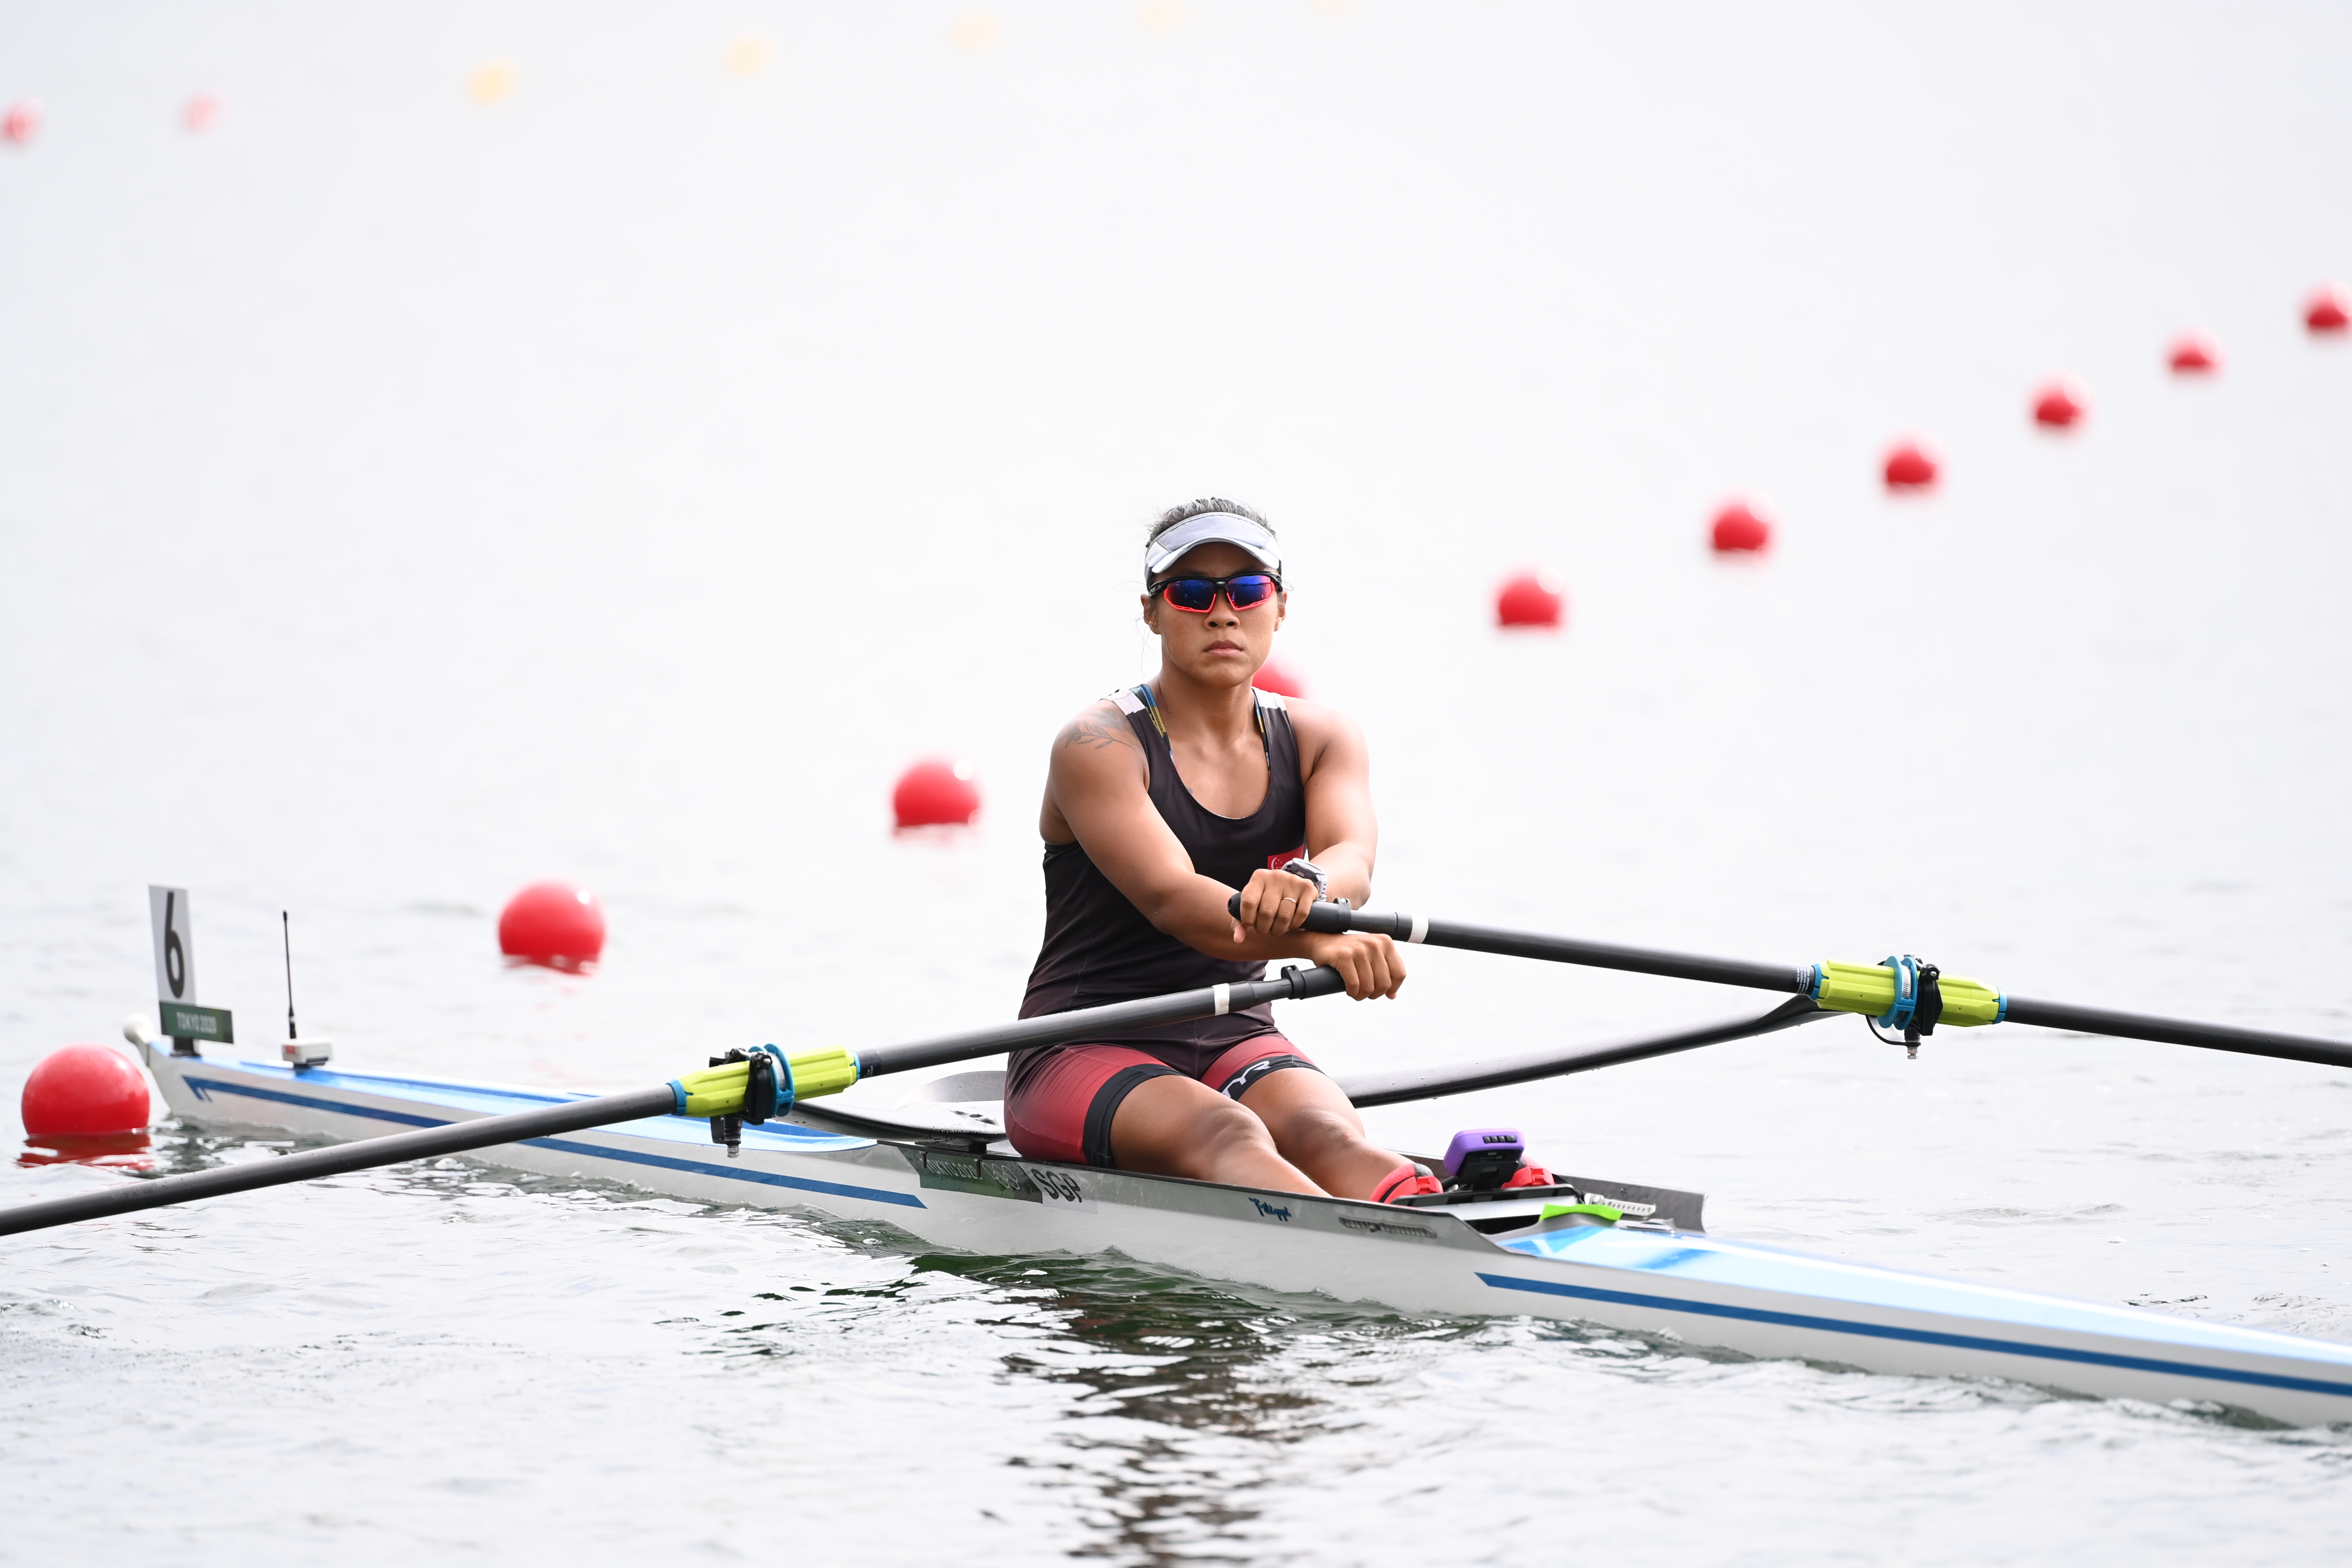 Tokyo 2020 : Fulltime Staff Nurse & TeamSG Sculler Joan Poh, finishes her maiden Olympic campaign with her best race performance!